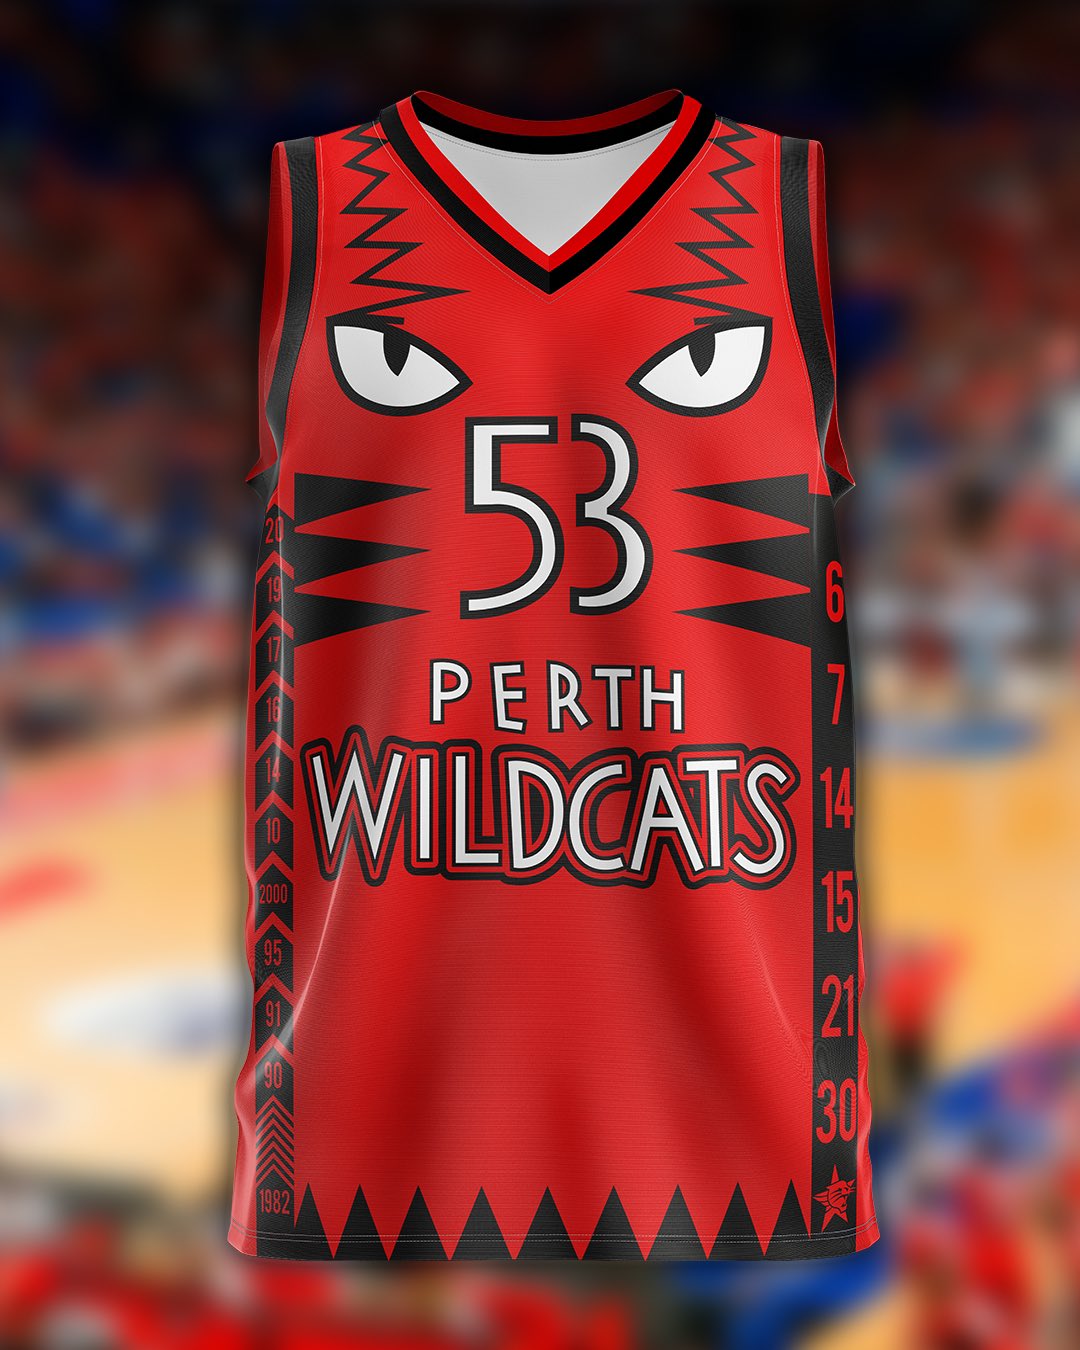 Perth Wildcats on X: Thank you for sharing your amazing Wildcats